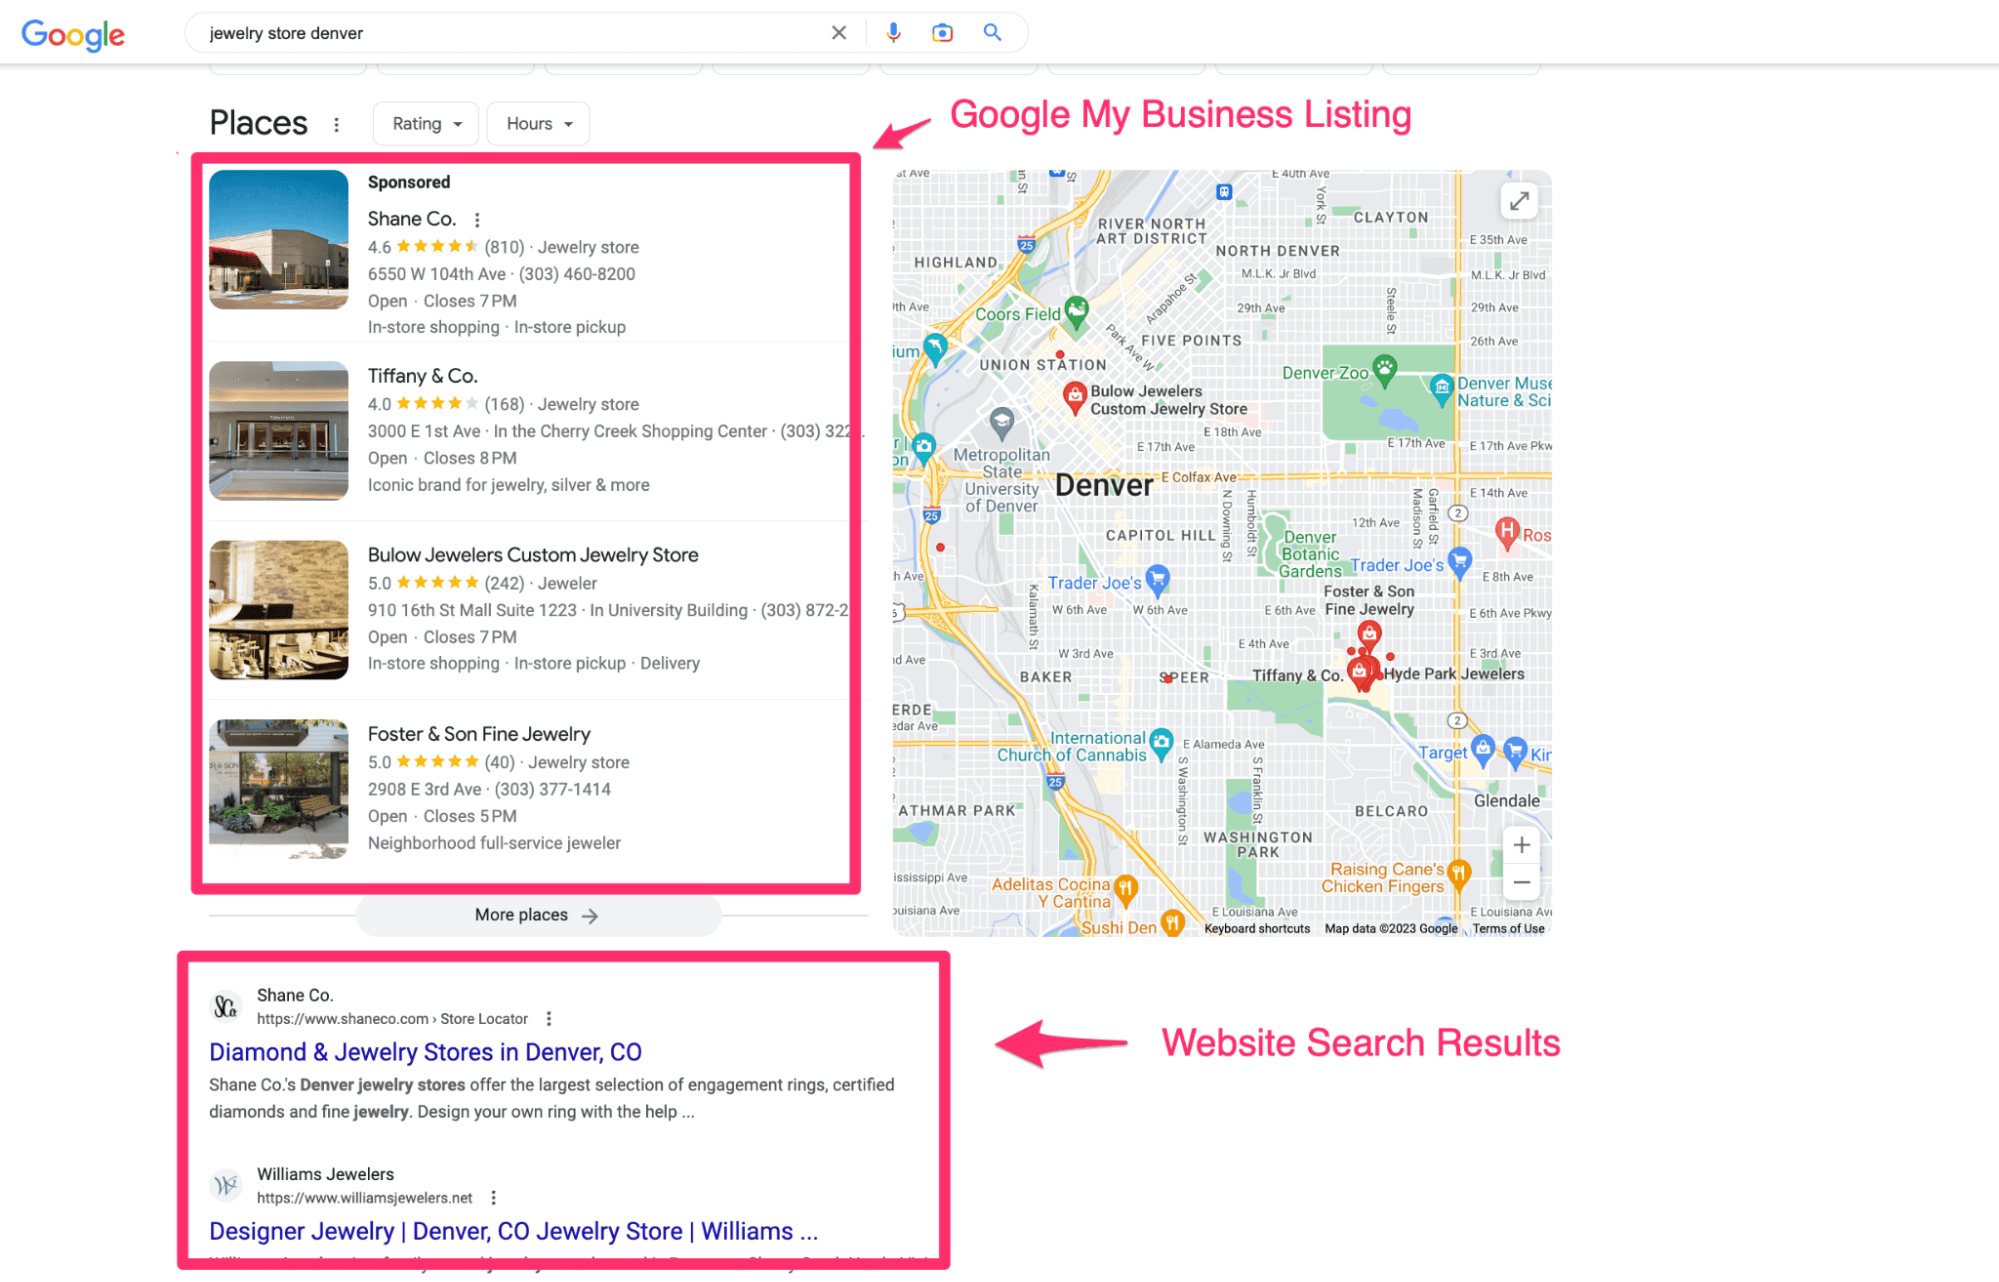 What is a Google My Business listing